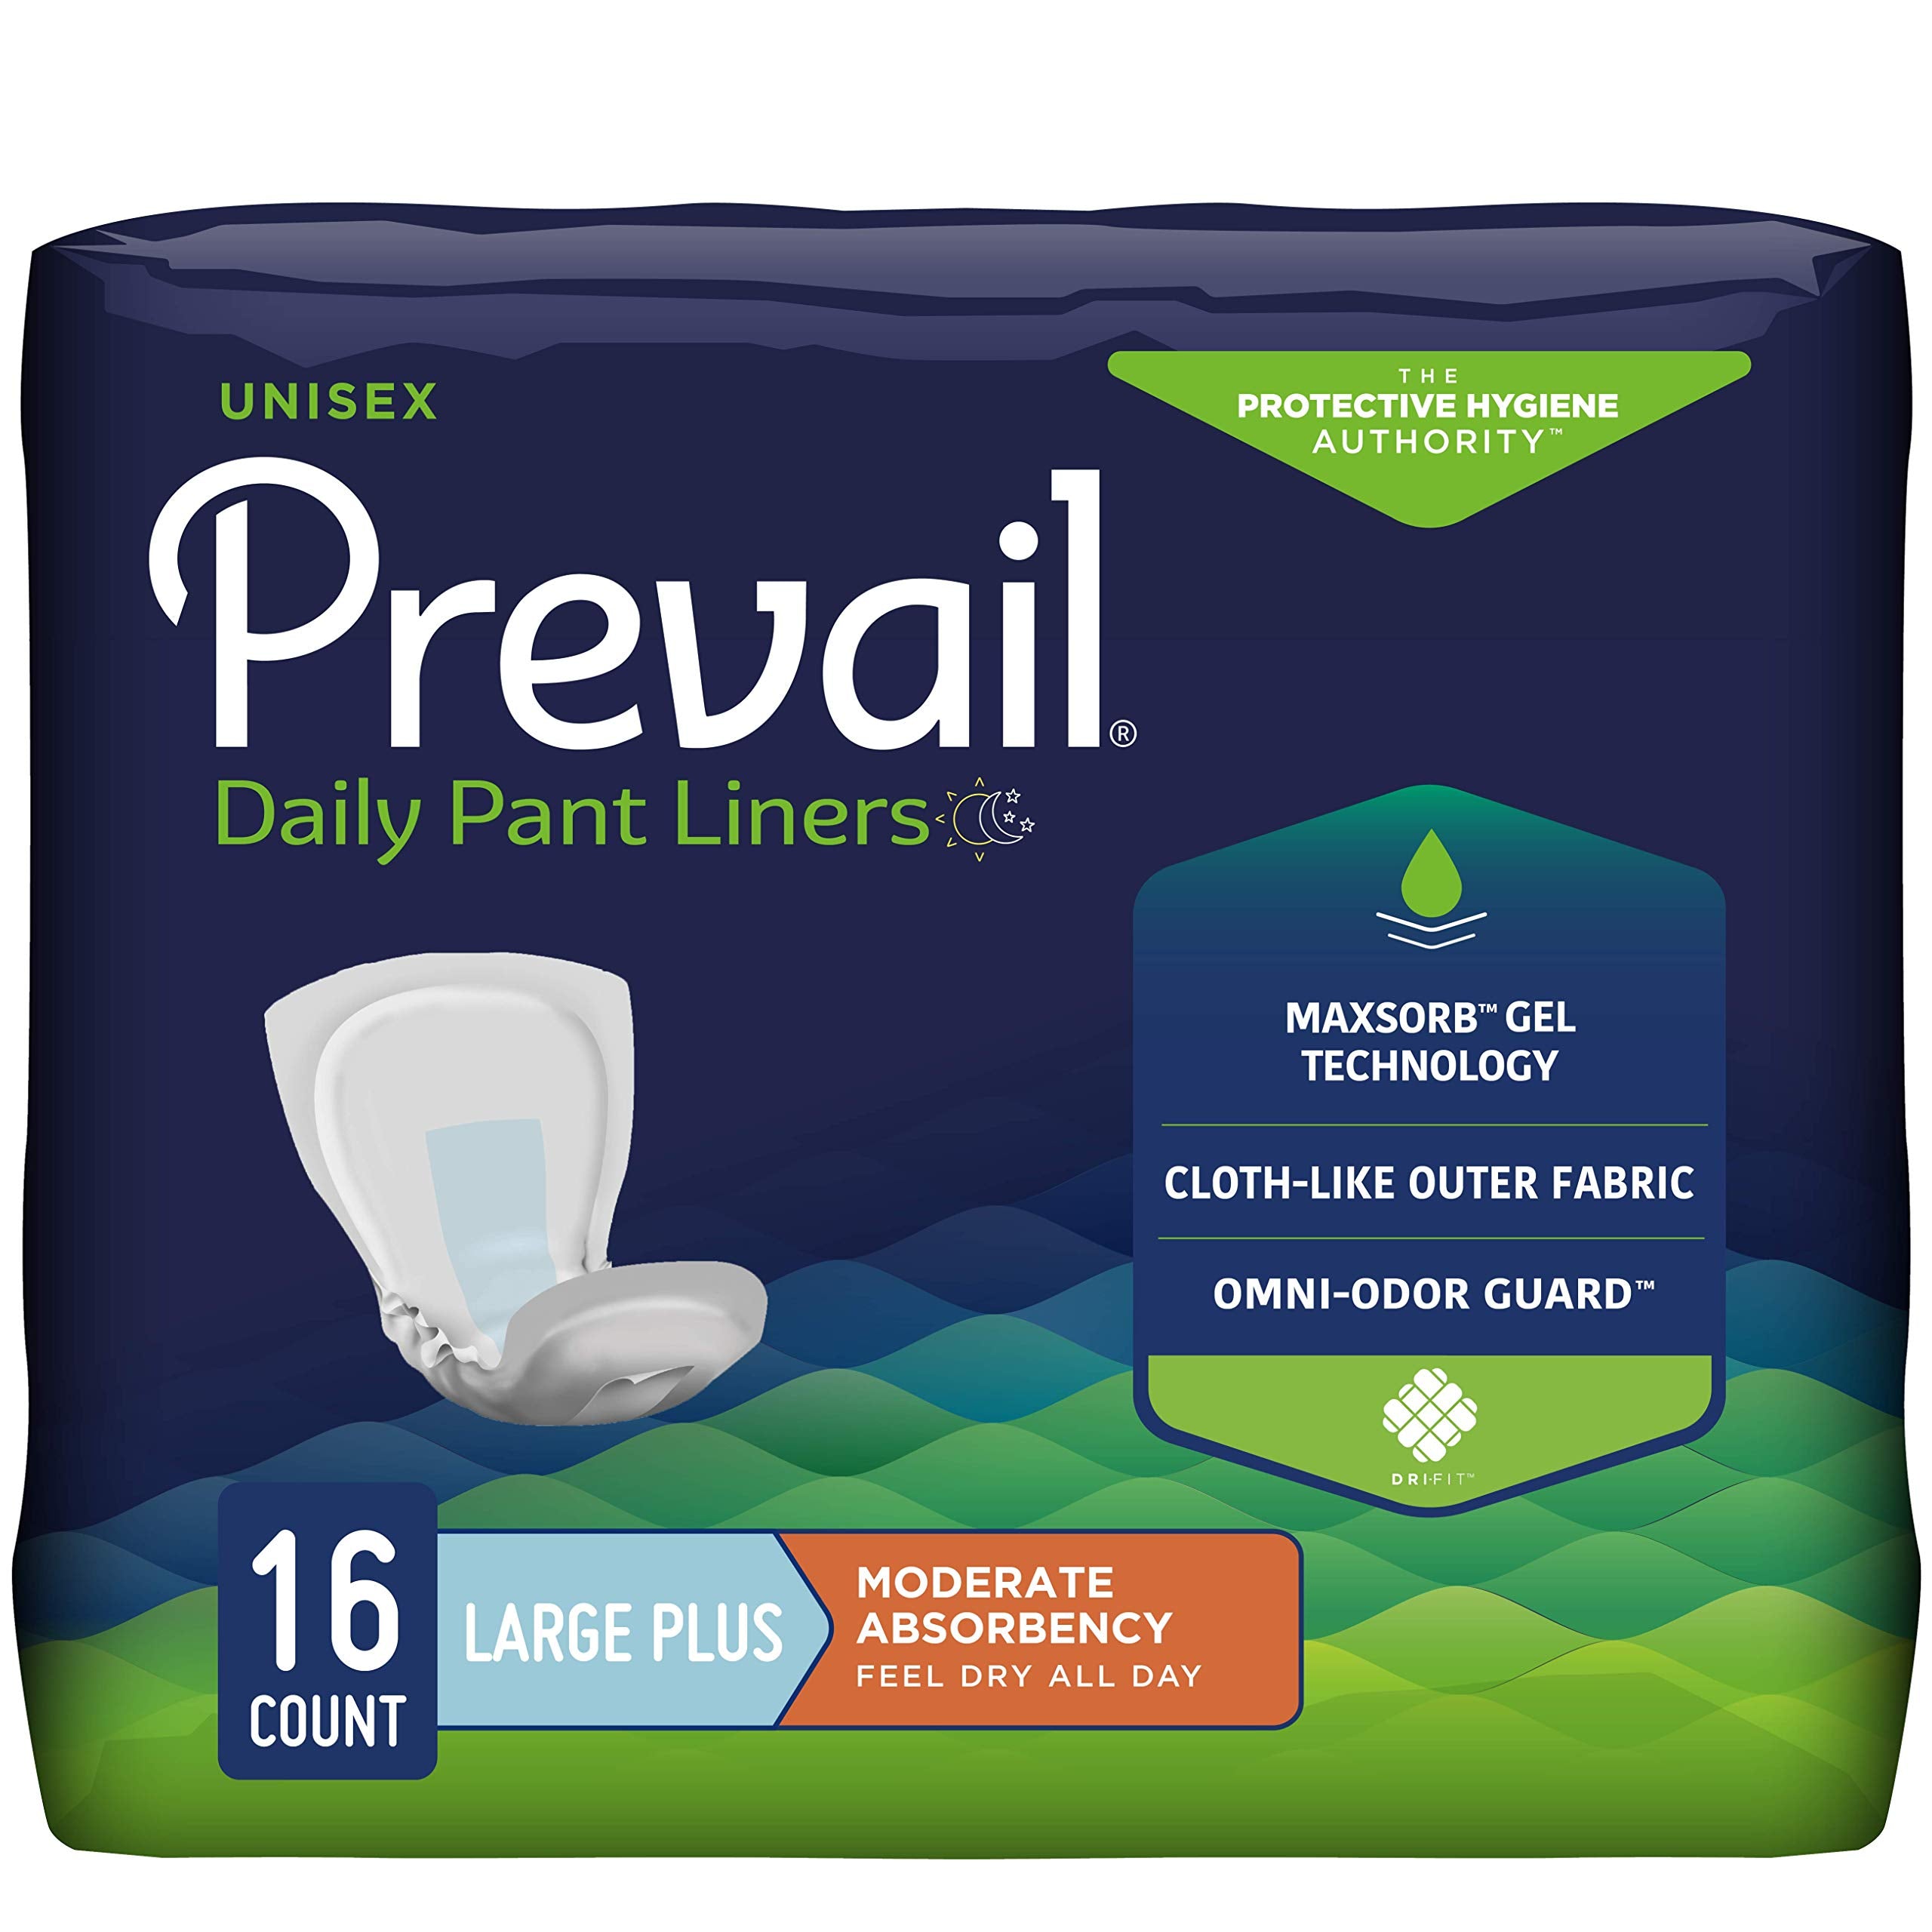 Prevail Incontinence Daily Pant Liners, Unisex, Moderate Absorbency, Large Plus, 16 Count